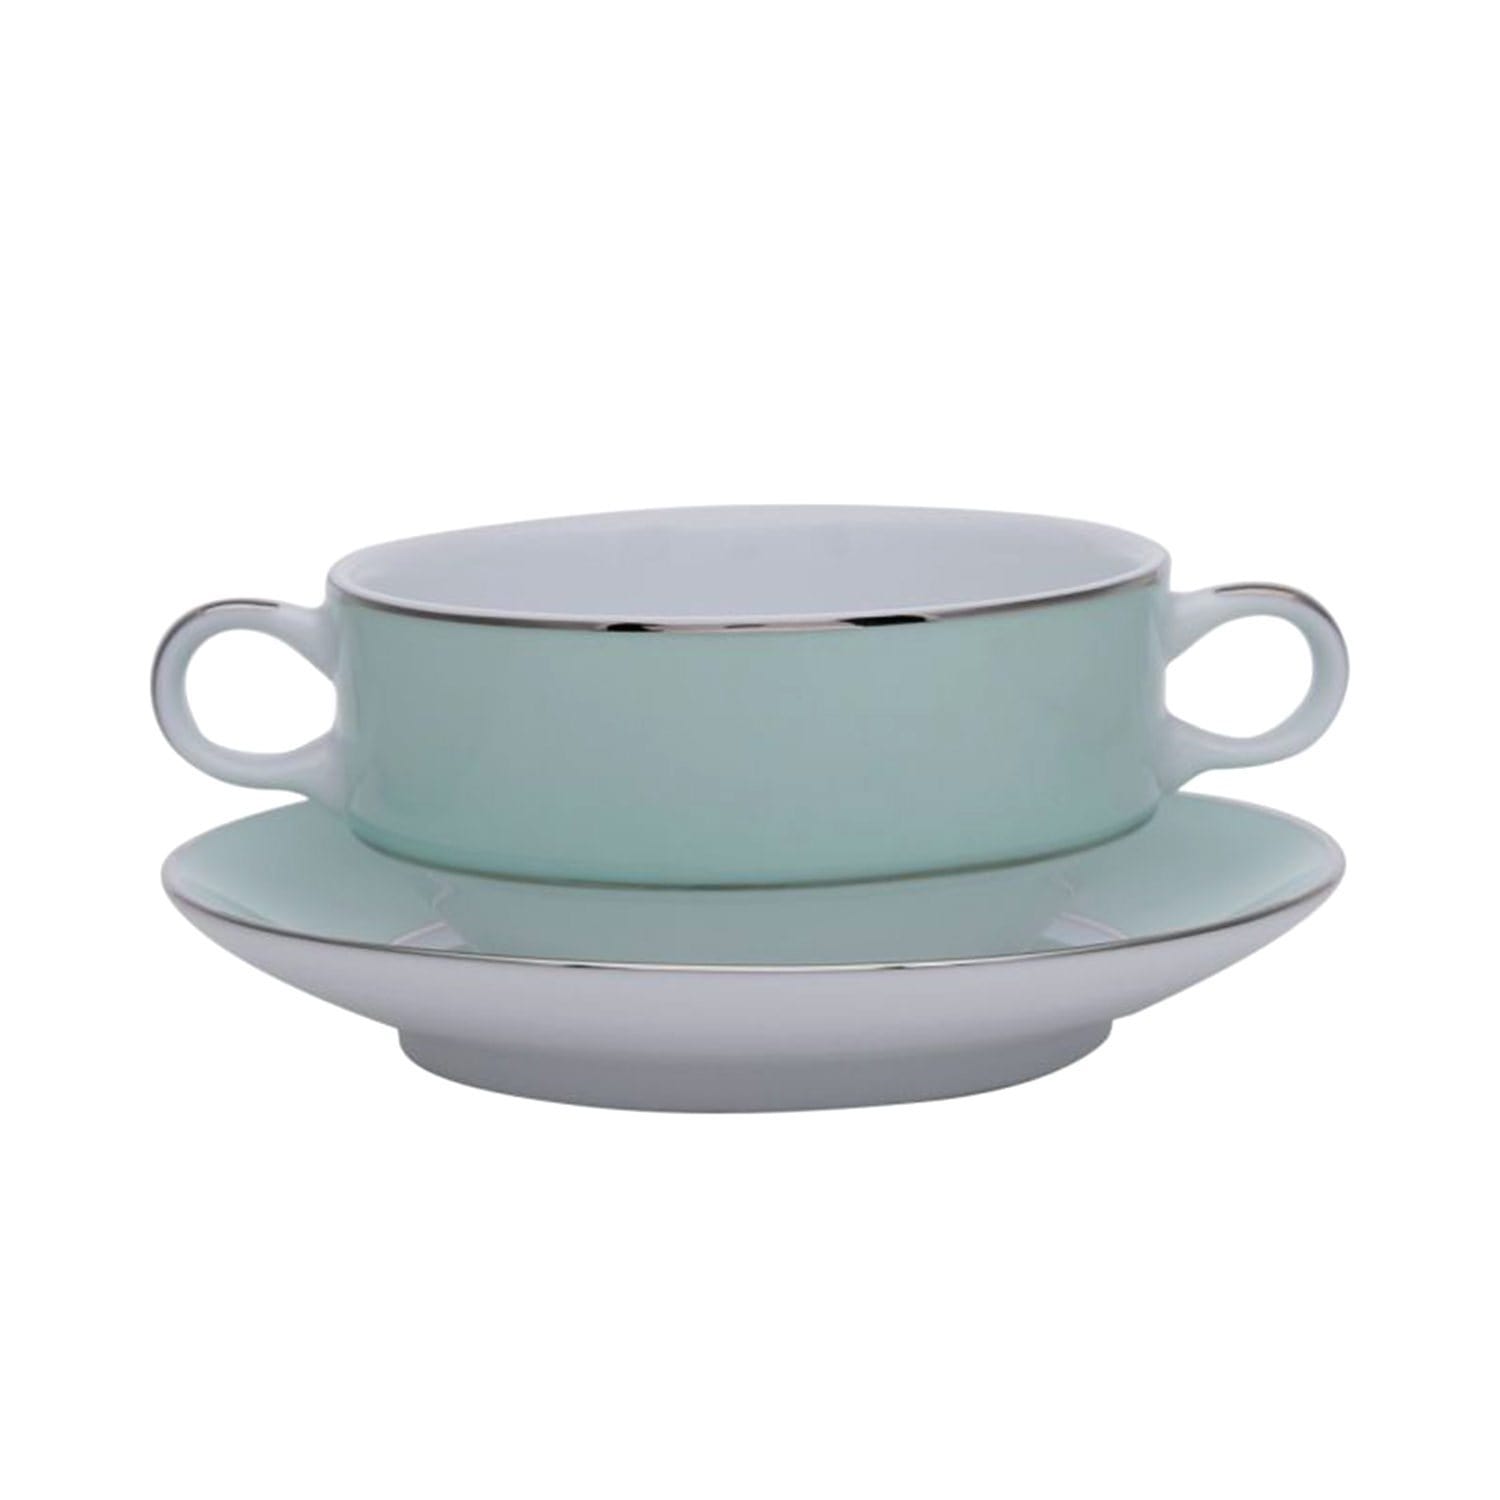 Dankotuwa Meldy Green Soup Cup and Saucer Set - White and Green - MELDYG-SC/S - Jashanmal Home